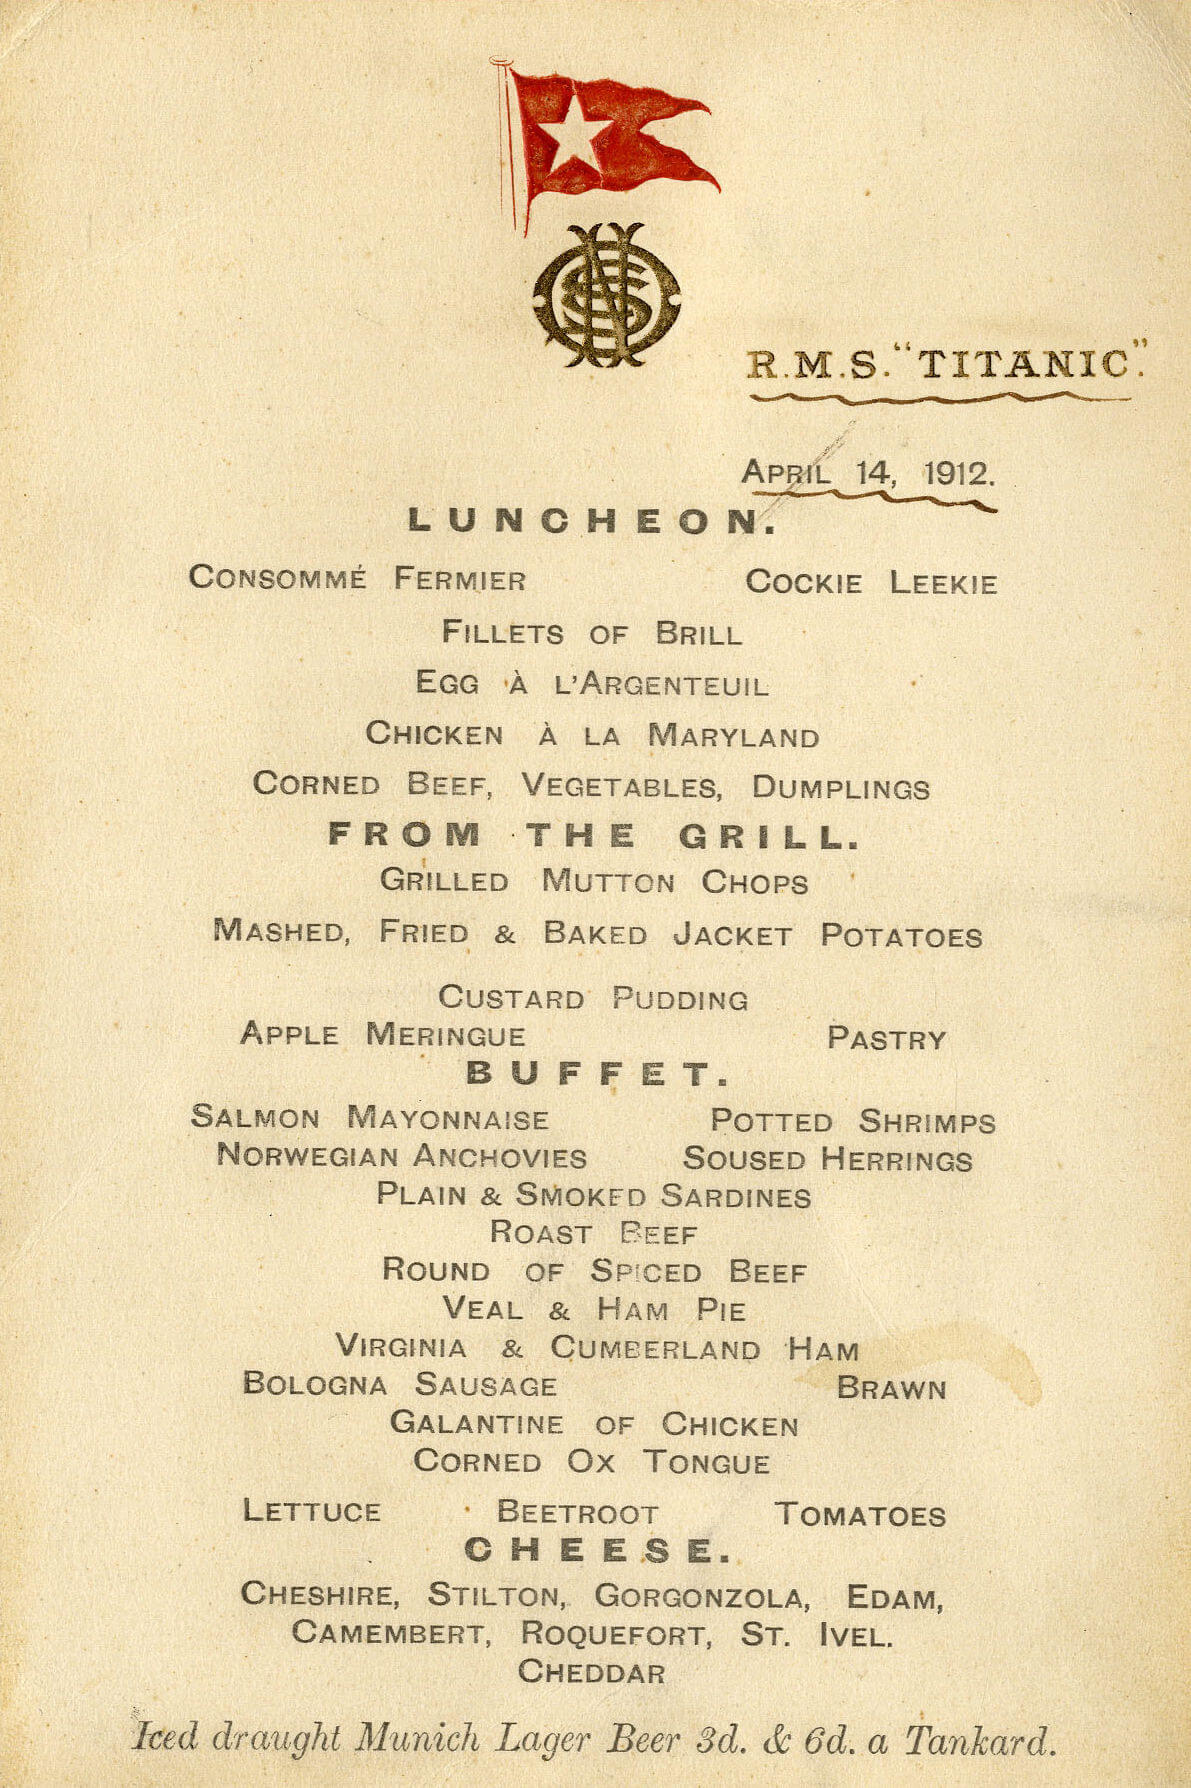 The Titanic luncheon card dates April 14, 1912